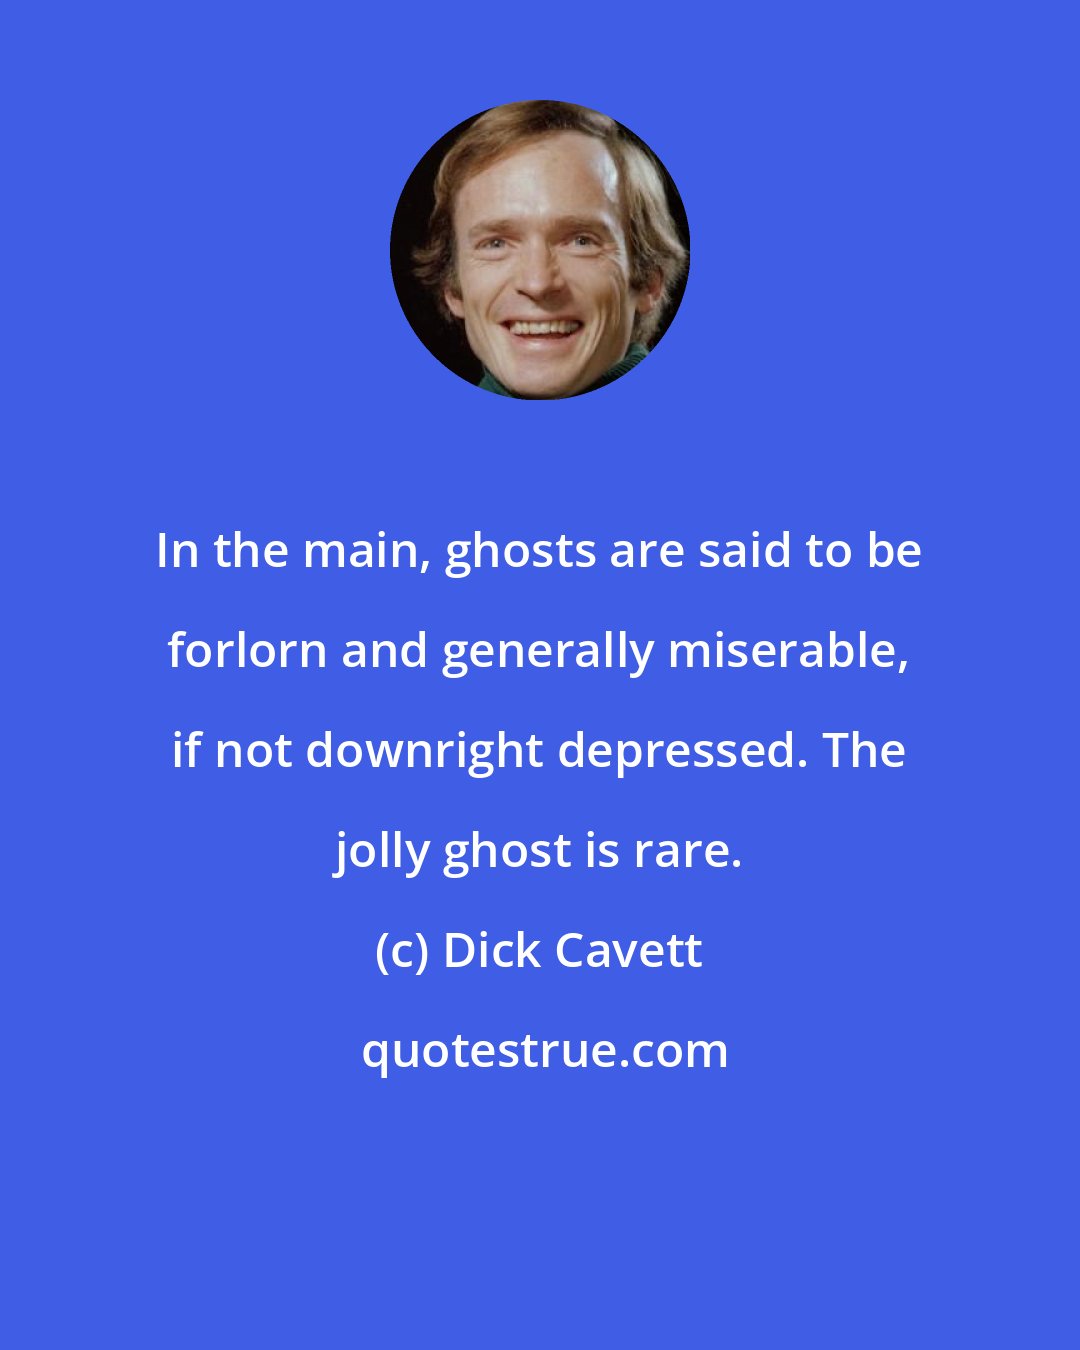 Dick Cavett: In the main, ghosts are said to be forlorn and generally miserable, if not downright depressed. The jolly ghost is rare.